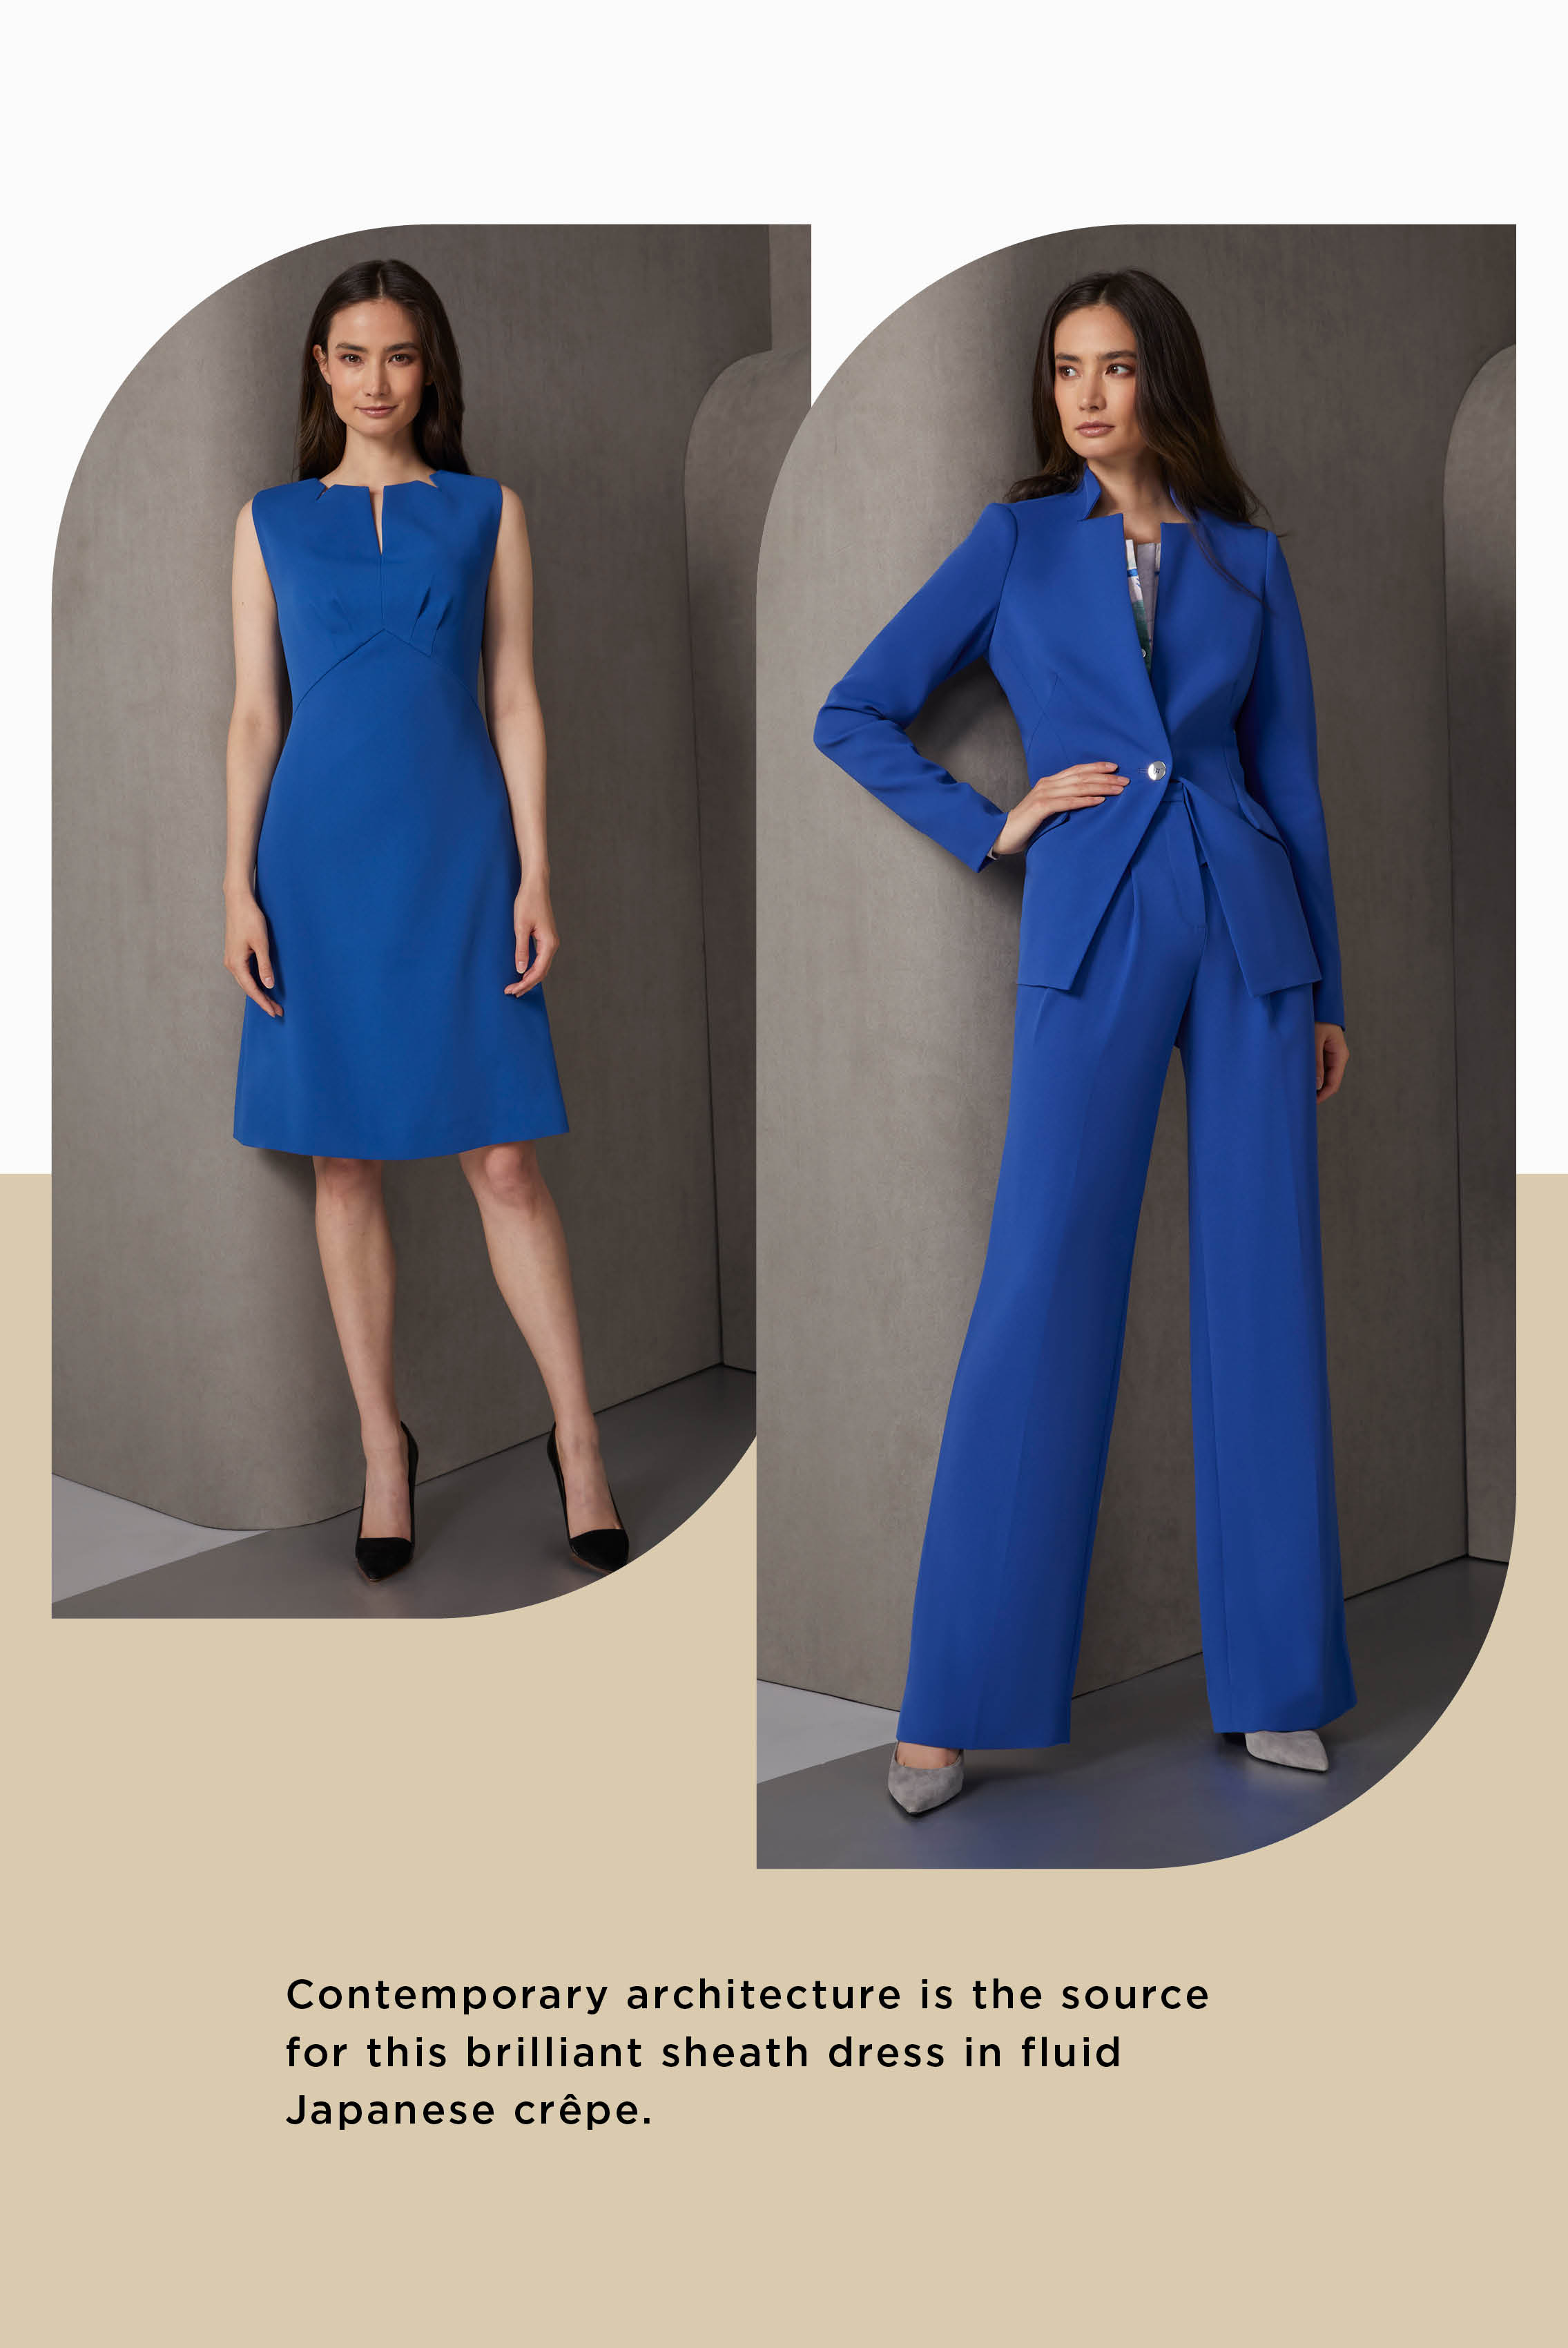 Contemporary architecture is the source for this brilliant sheath dress in fluid Japanese crêpe. Distinctive notches create standout elegance at the boat neck. Pleats at the bodice afford an attractive, comfortable fit.